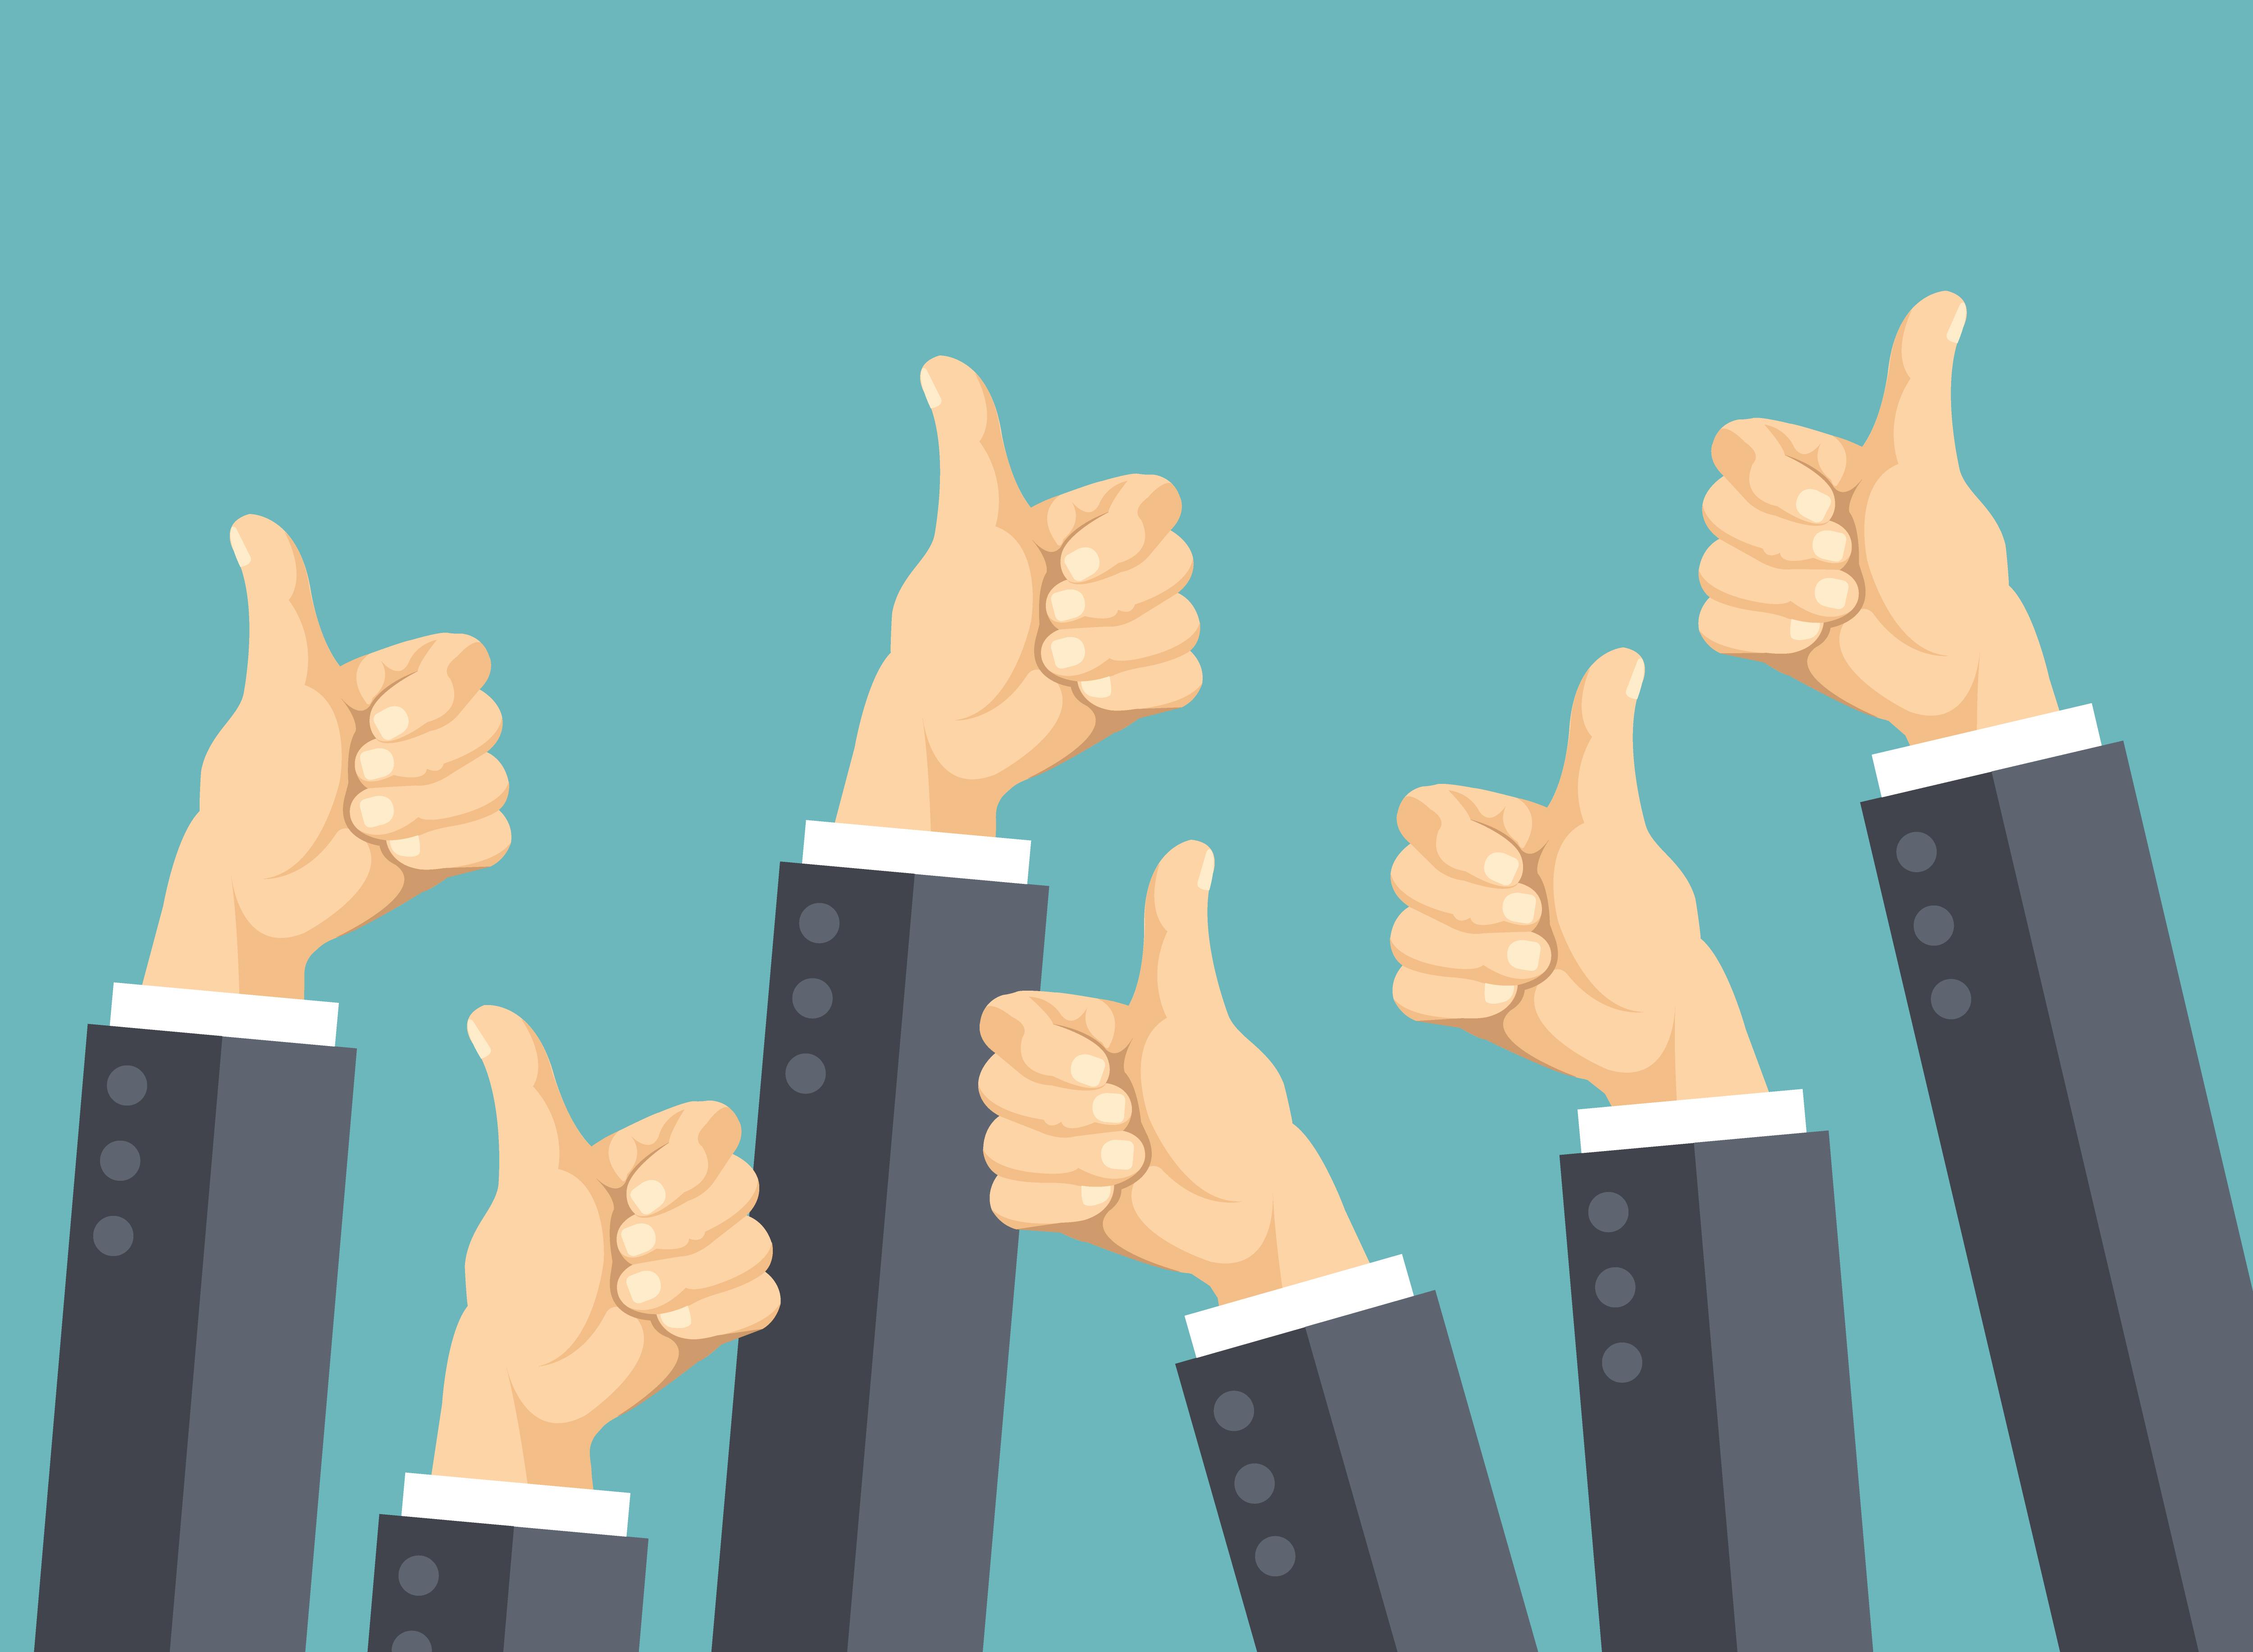 vector image of many thumbs up